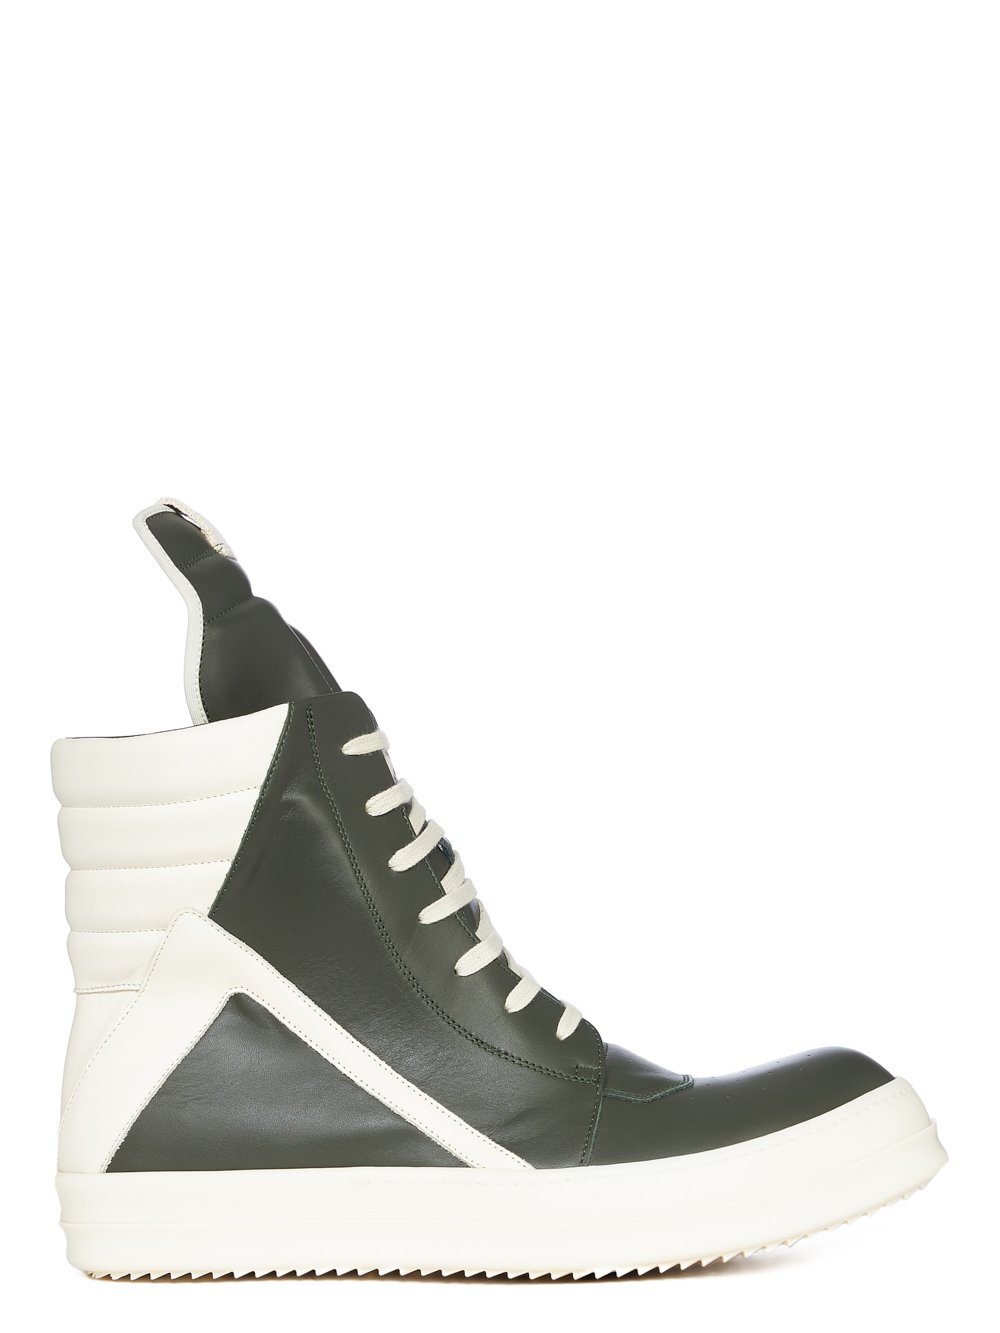 RICK OWENS FW23 LUXOR GEOBASKET IN FOREST CORTINA GREASE CALF LEATHER AND FULL GRAIN CALF LEATHER 